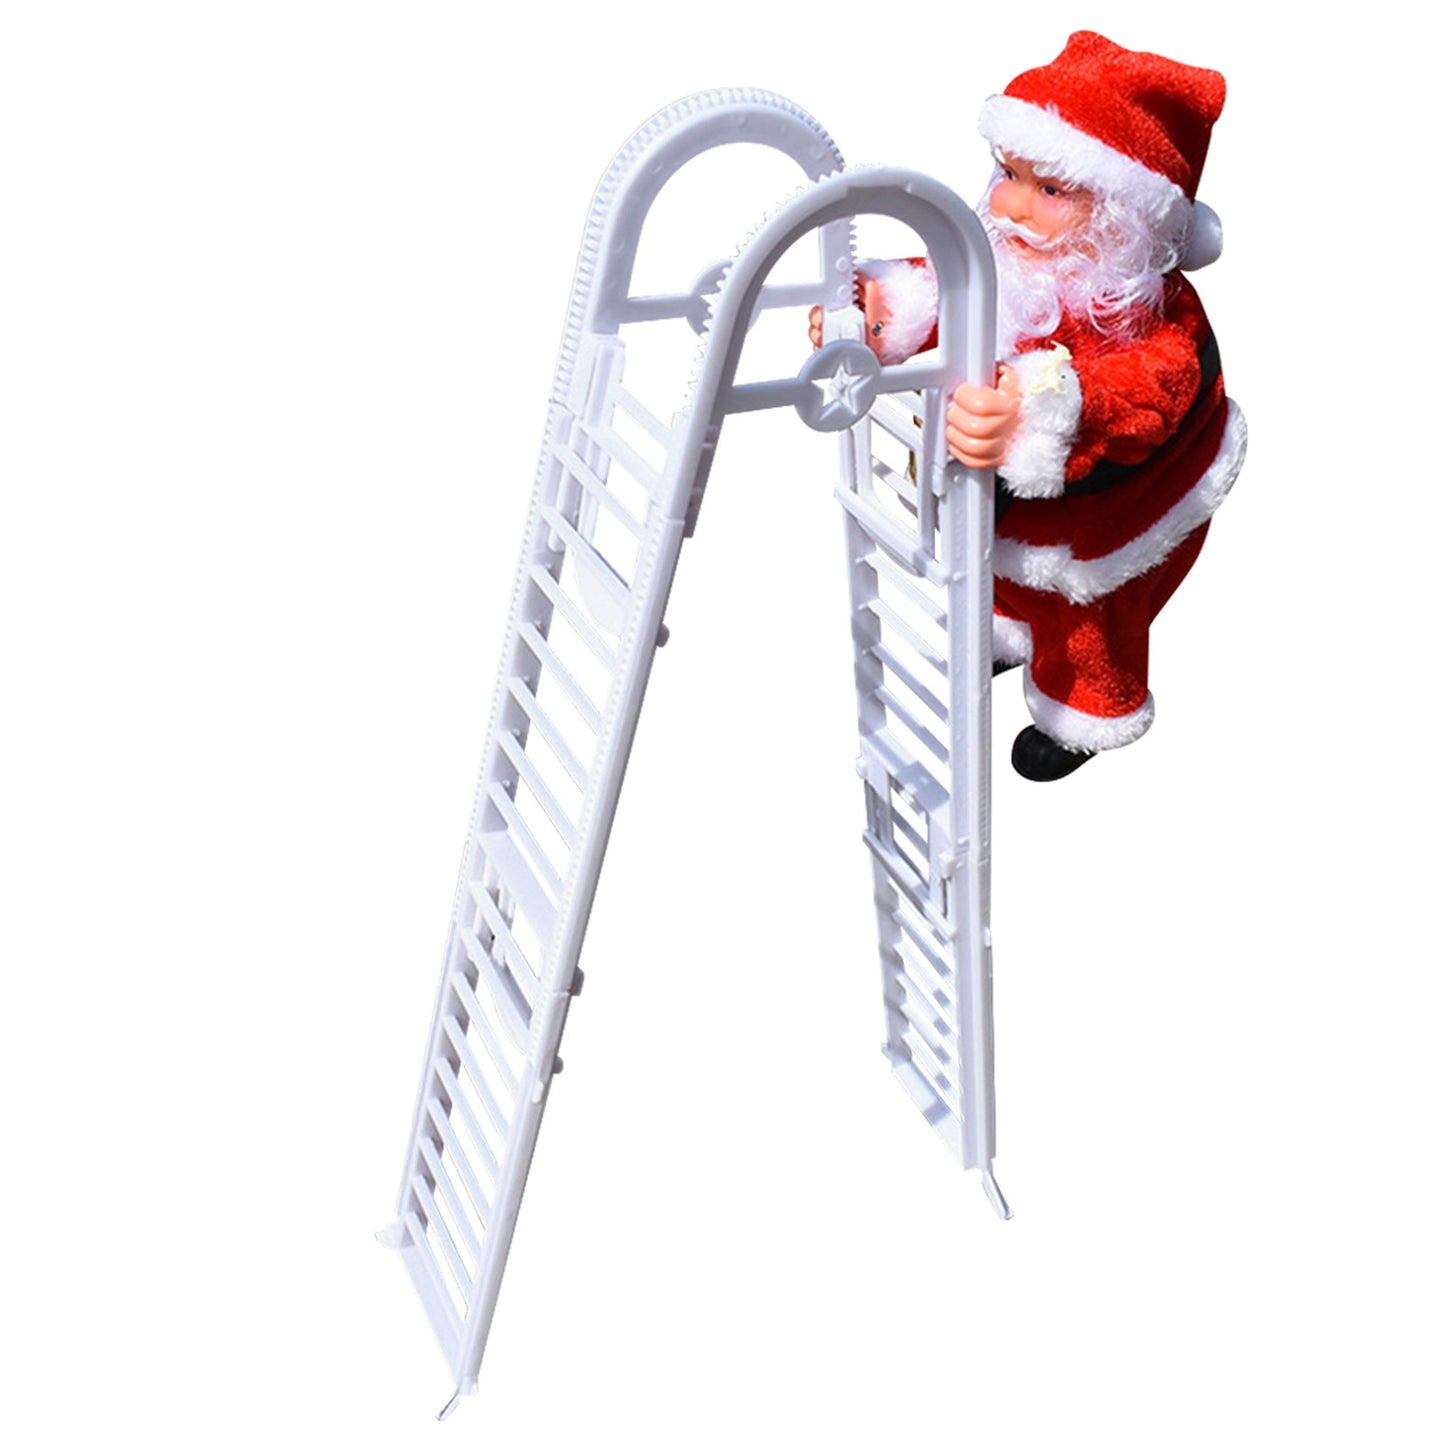 Santa Claus Climbing Beads Battery Operated Electric Climb Up and Down Climbing Santa With Light Music Christmas Decor Ornaments